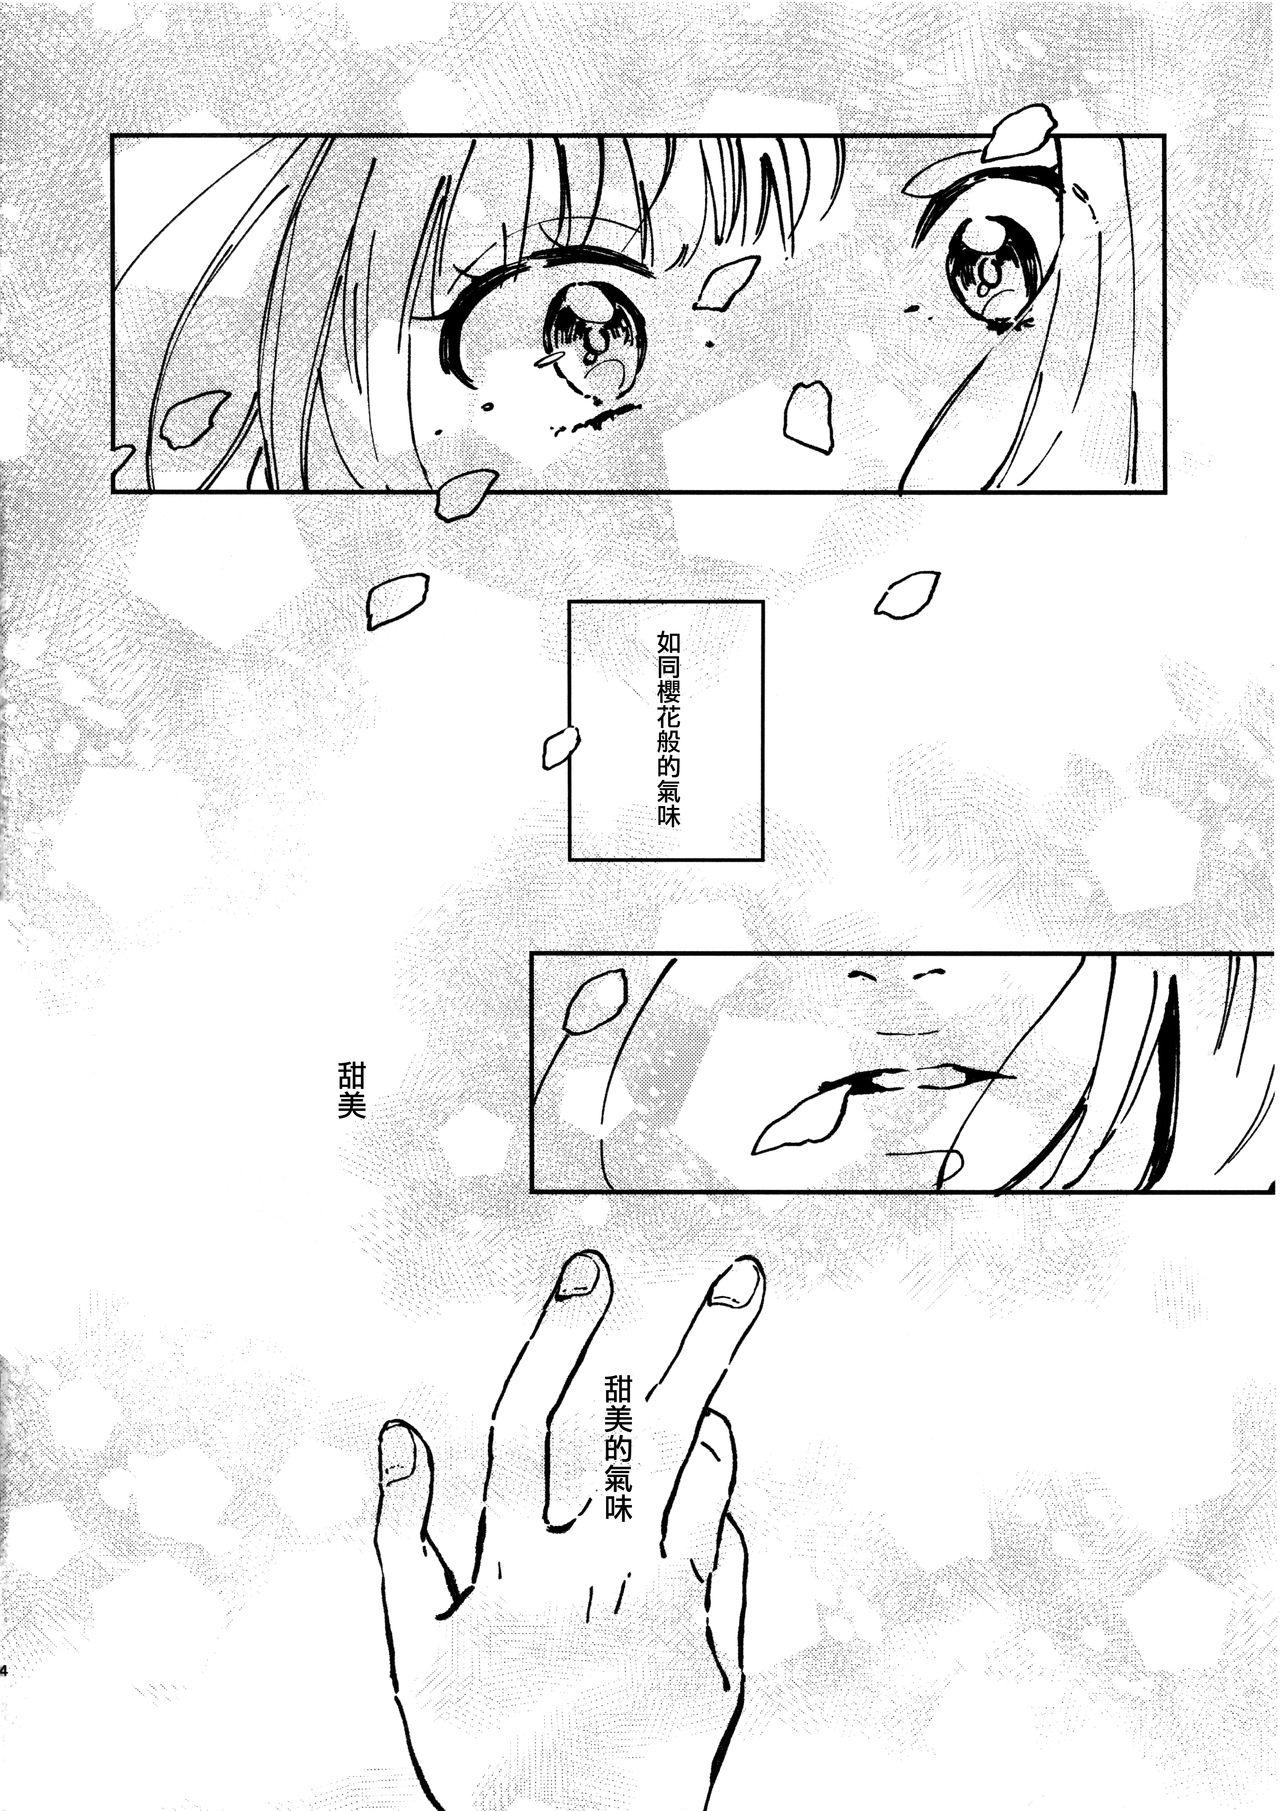 Farting You are my mari - Bang dream Bathroom - Page 4